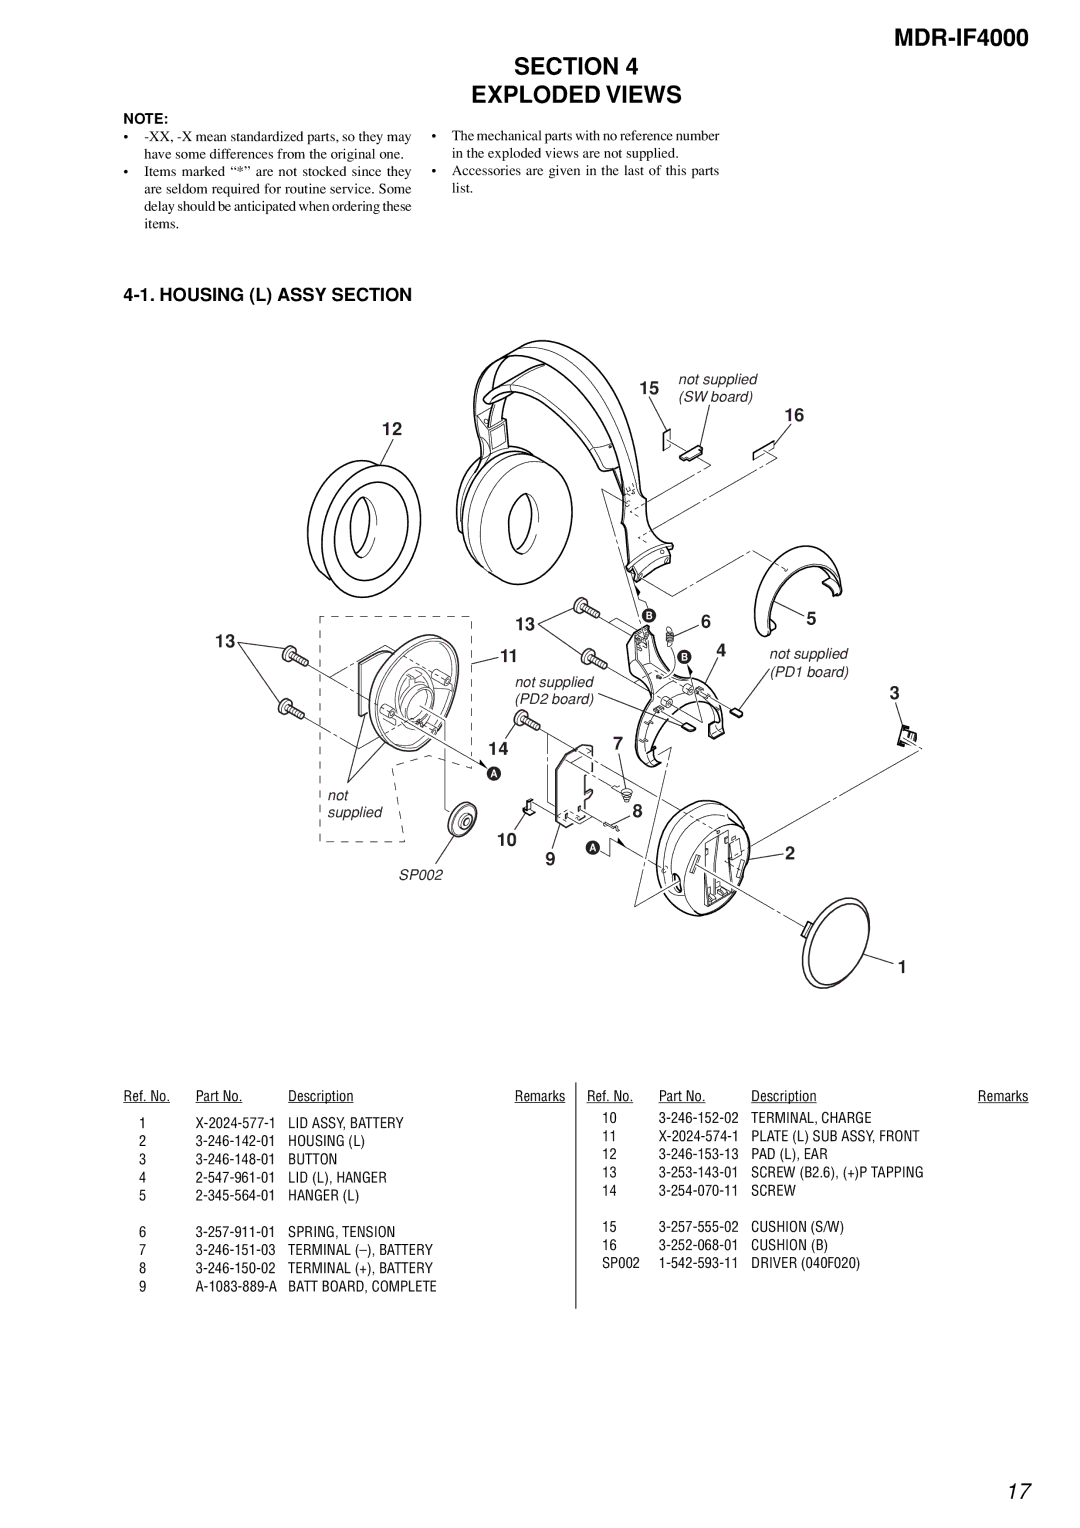 Sony MDR-IF4000 service manual Section Exploded Views, Housing L Assy Section 